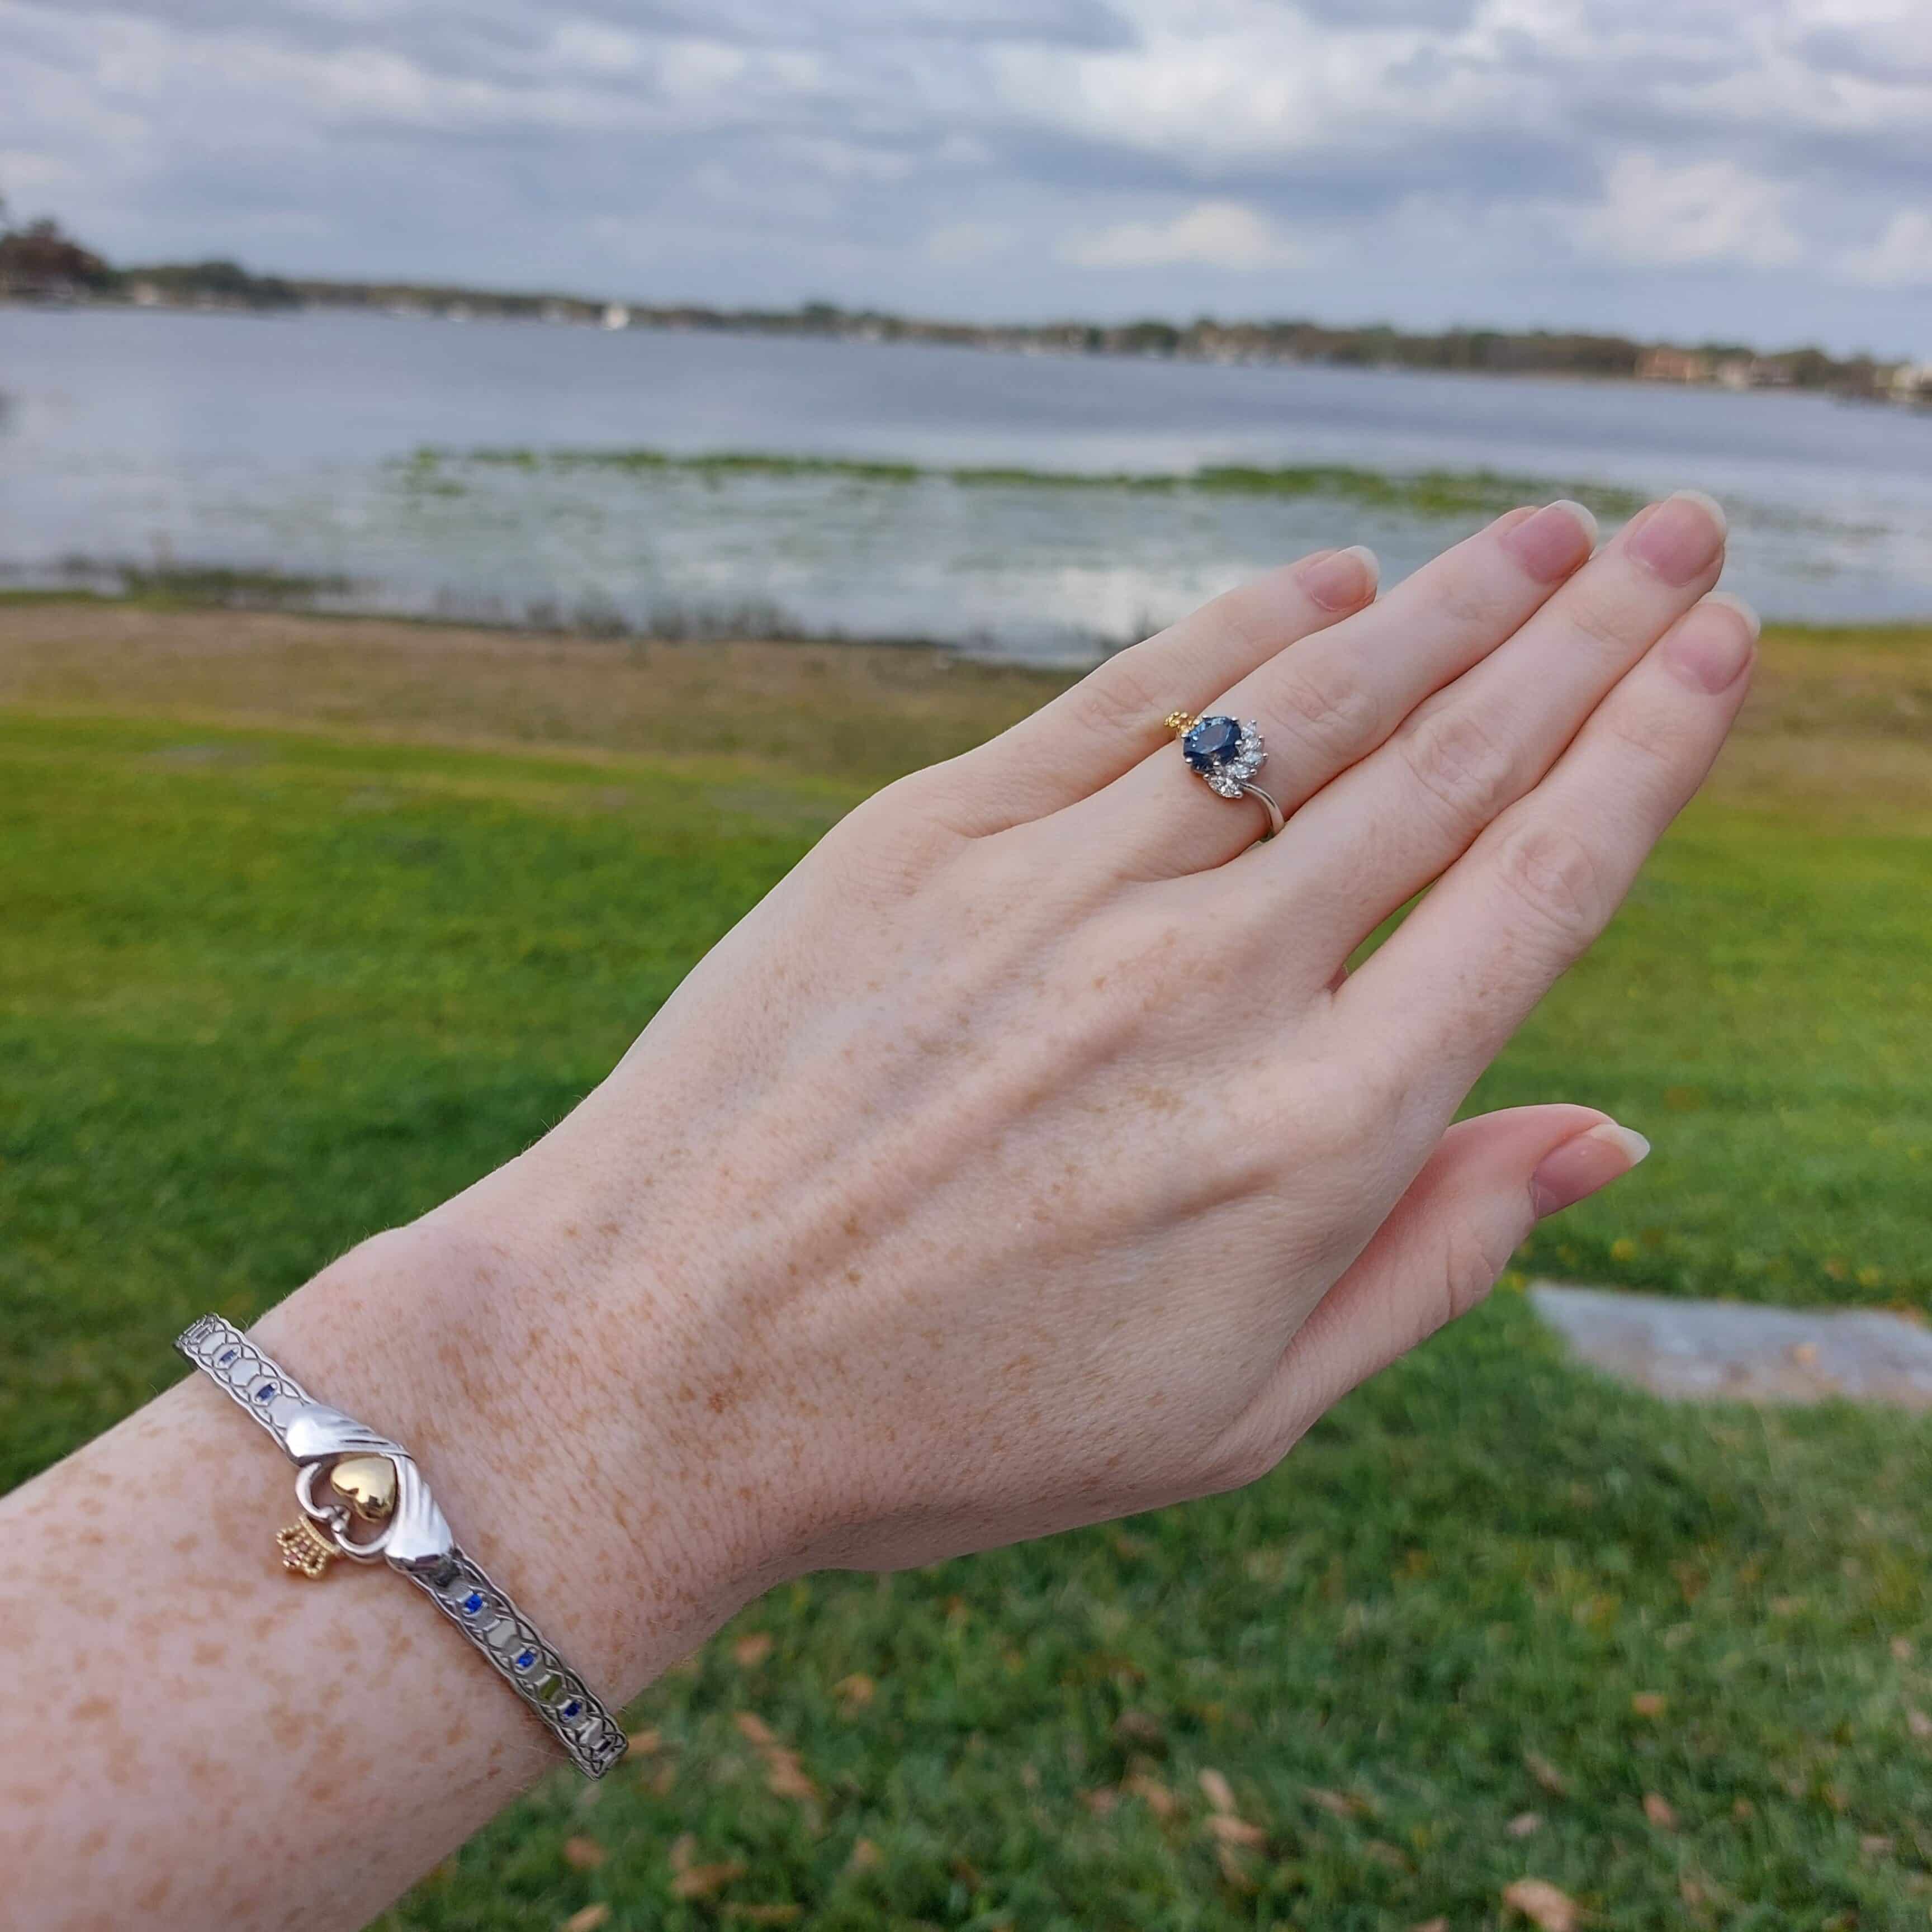 A photo from a customer review featuring a custom two-tone engagement ring and bracelet